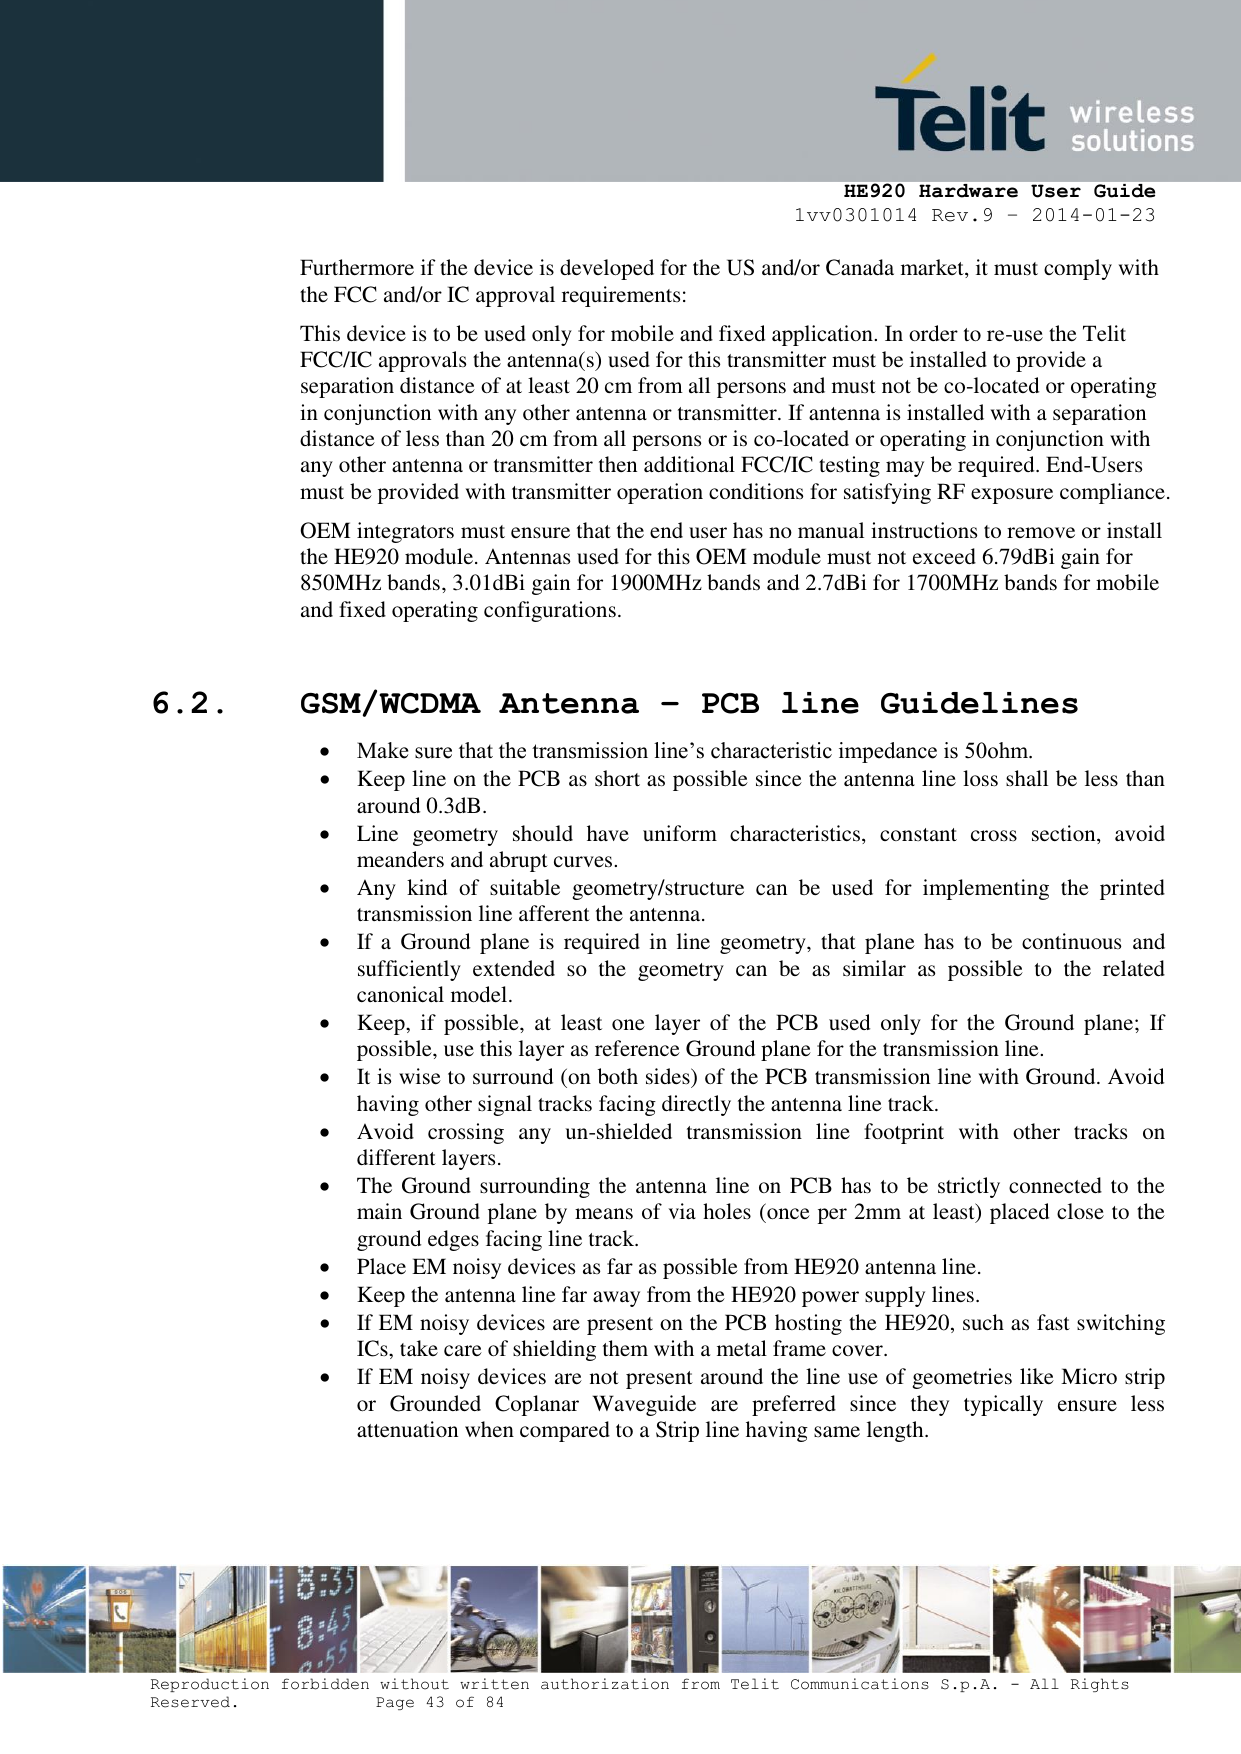     HE920 Hardware User Guide 1vv0301014 Rev.9 – 2014-01-23 Reproduction forbidden without written authorization from Telit Communications S.p.A. - All Rights Reserved.    Page 43 of 84  Furthermore if the device is developed for the US and/or Canada market, it must comply with the FCC and/or IC approval requirements: This device is to be used only for mobile and fixed application. In order to re-use the Telit FCC/IC approvals the antenna(s) used for this transmitter must be installed to provide a separation distance of at least 20 cm from all persons and must not be co-located or operating in conjunction with any other antenna or transmitter. If antenna is installed with a separation distance of less than 20 cm from all persons or is co-located or operating in conjunction with any other antenna or transmitter then additional FCC/IC testing may be required. End-Users must be provided with transmitter operation conditions for satisfying RF exposure compliance.  OEM integrators must ensure that the end user has no manual instructions to remove or install the HE920 module. Antennas used for this OEM module must not exceed 6.79dBi gain for 850MHz bands, 3.01dBi gain for 1900MHz bands and 2.7dBi for 1700MHz bands for mobile and fixed operating configurations.  6.2. GSM/WCDMA Antenna – PCB line Guidelines  Make sure that the transmission line’s characteristic impedance is 50ohm.  Keep line on the PCB as short as possible since the antenna line loss shall be less than around 0.3dB.  Line  geometry  should  have  uniform  characteristics,  constant  cross  section,  avoid meanders and abrupt curves.  Any  kind  of  suitable  geometry/structure  can  be  used  for  implementing  the  printed transmission line afferent the antenna.  If a  Ground  plane is  required in  line geometry, that  plane  has to  be  continuous  and sufficiently  extended  so  the  geometry  can  be  as  similar  as  possible  to  the  related canonical model.  Keep,  if  possible,  at  least one  layer  of  the  PCB  used  only  for  the  Ground plane;  If possible, use this layer as reference Ground plane for the transmission line.  It is wise to surround (on both sides) of the PCB transmission line with Ground. Avoid having other signal tracks facing directly the antenna line track.  Avoid  crossing  any  un-shielded  transmission  line  footprint  with  other  tracks  on different layers.  The Ground surrounding the antenna line on PCB has to be strictly connected to the main Ground plane by means of via holes (once per 2mm at least) placed close to the ground edges facing line track.  Place EM noisy devices as far as possible from HE920 antenna line.  Keep the antenna line far away from the HE920 power supply lines.  If EM noisy devices are present on the PCB hosting the HE920, such as fast switching ICs, take care of shielding them with a metal frame cover.  If EM noisy devices are not present around the line use of geometries like Micro strip or  Grounded  Coplanar  Waveguide  are  preferred  since  they  typically  ensure  less attenuation when compared to a Strip line having same length.    